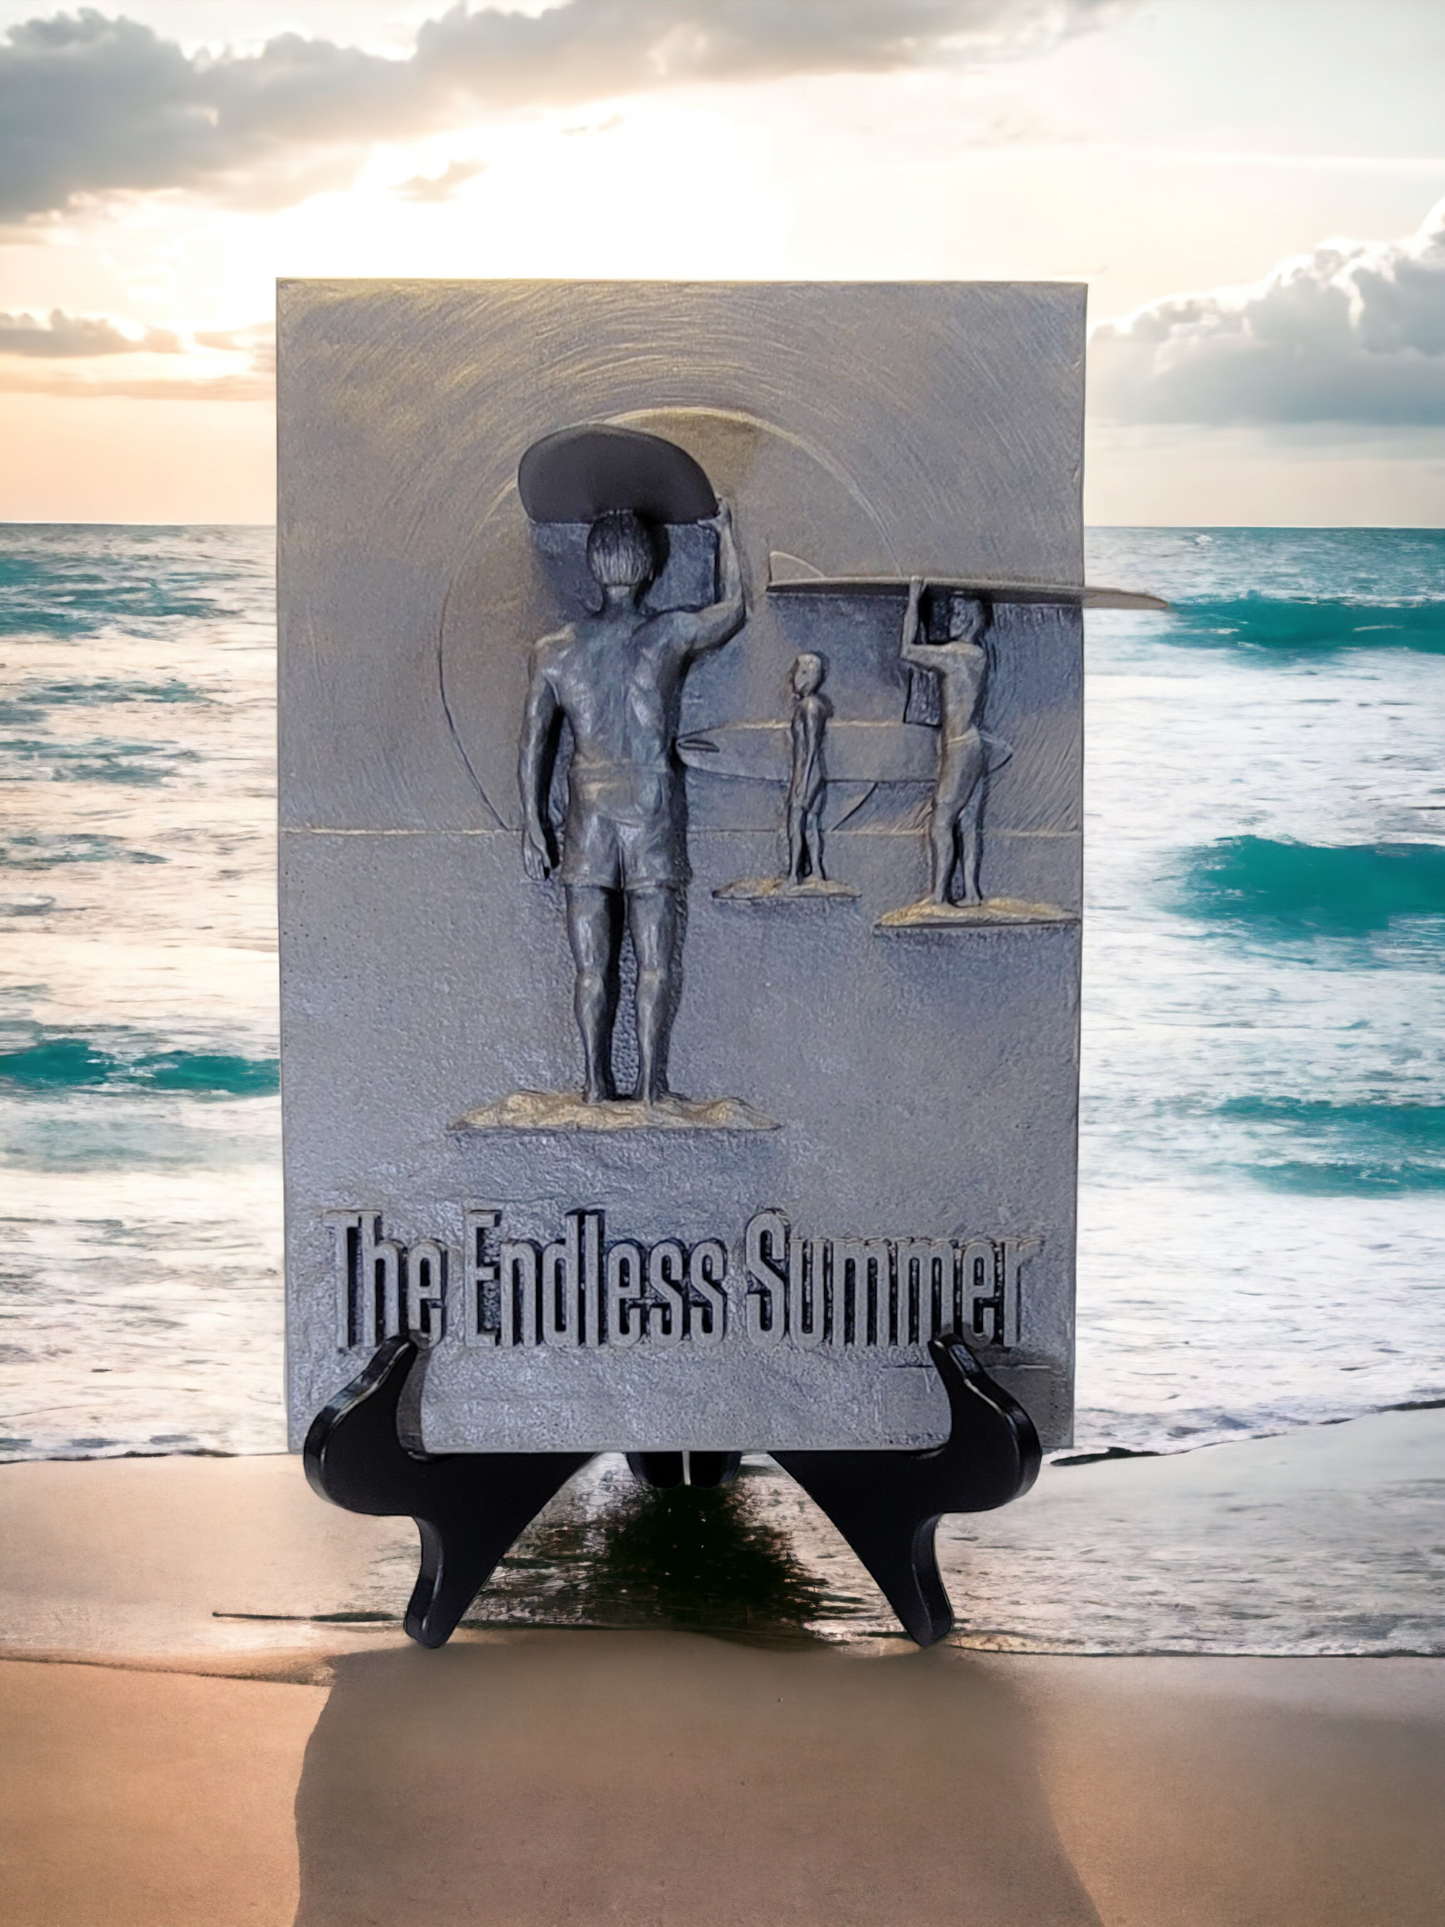 The Endless Summer Free Standing Sculpture by Dave C Reynolds